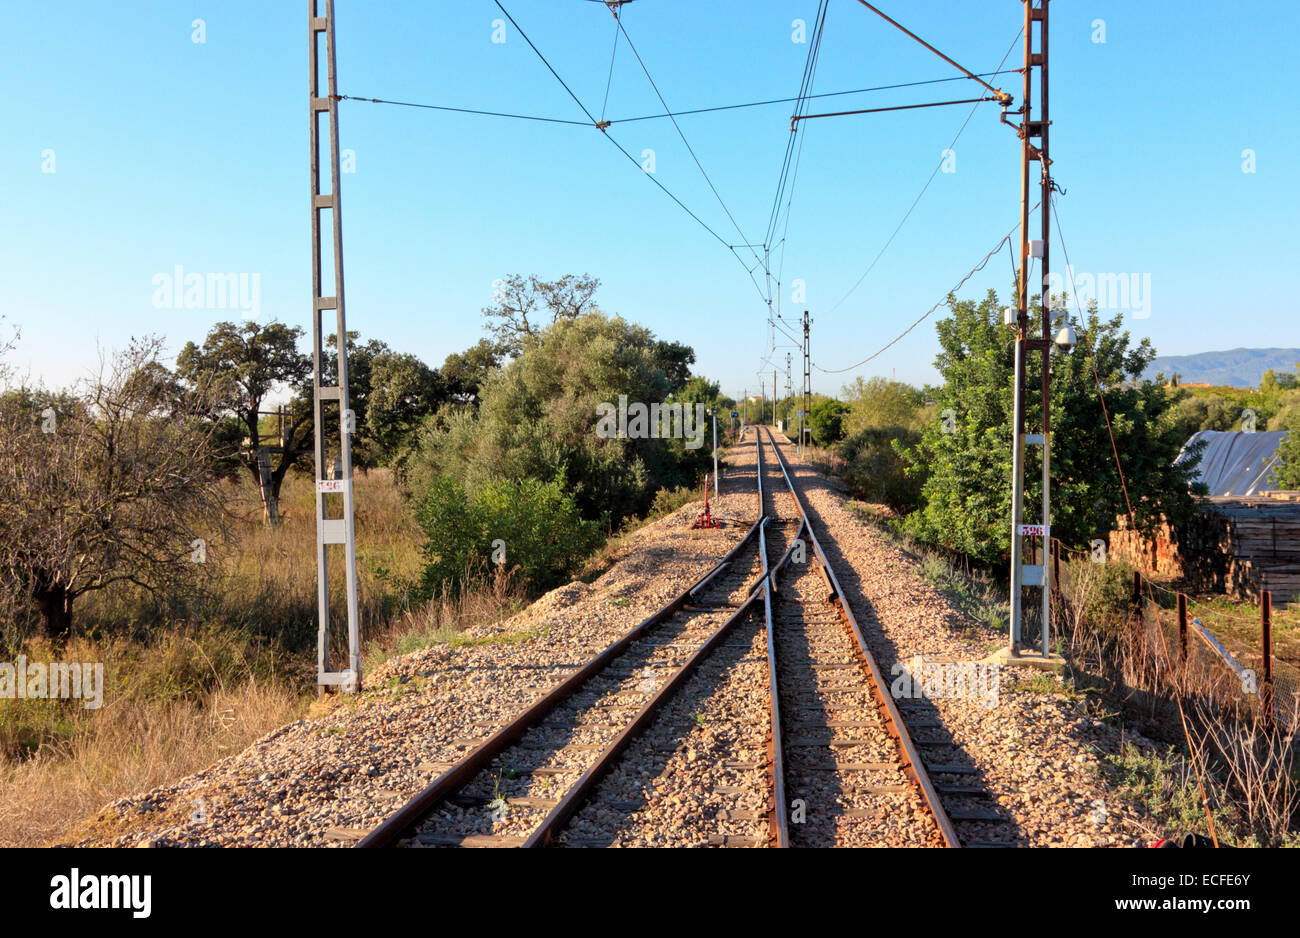 Tracks of the historical Railroad between Palma and Soller, Mallorca, Balearic Islands Stock Photo